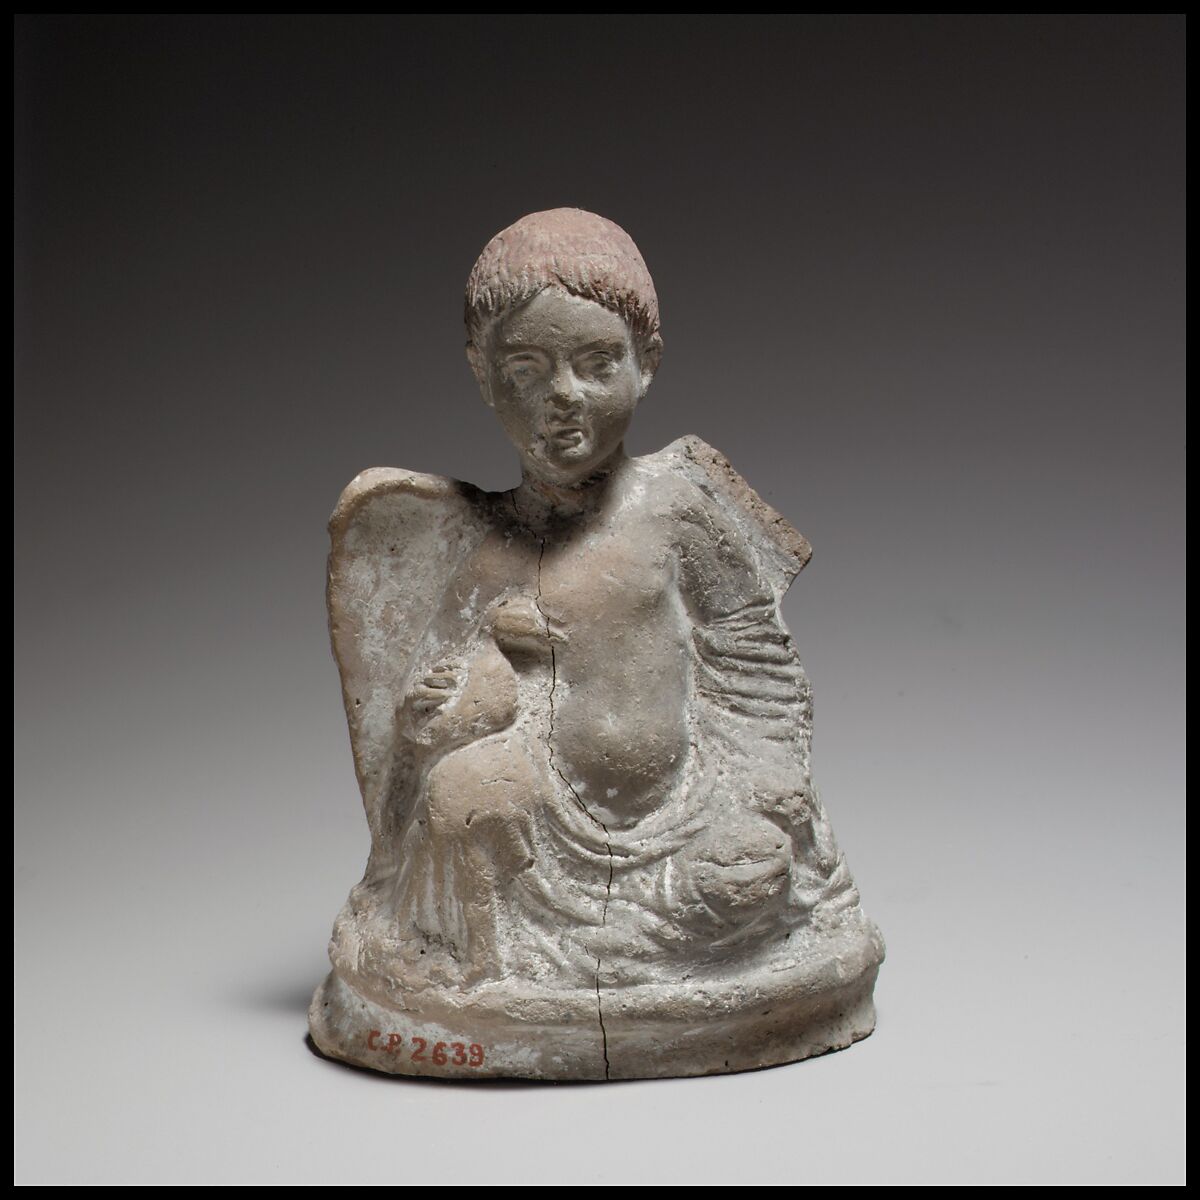 Terracotta statuette of Eros seated and holding a duck, Terracotta, Cypriot 